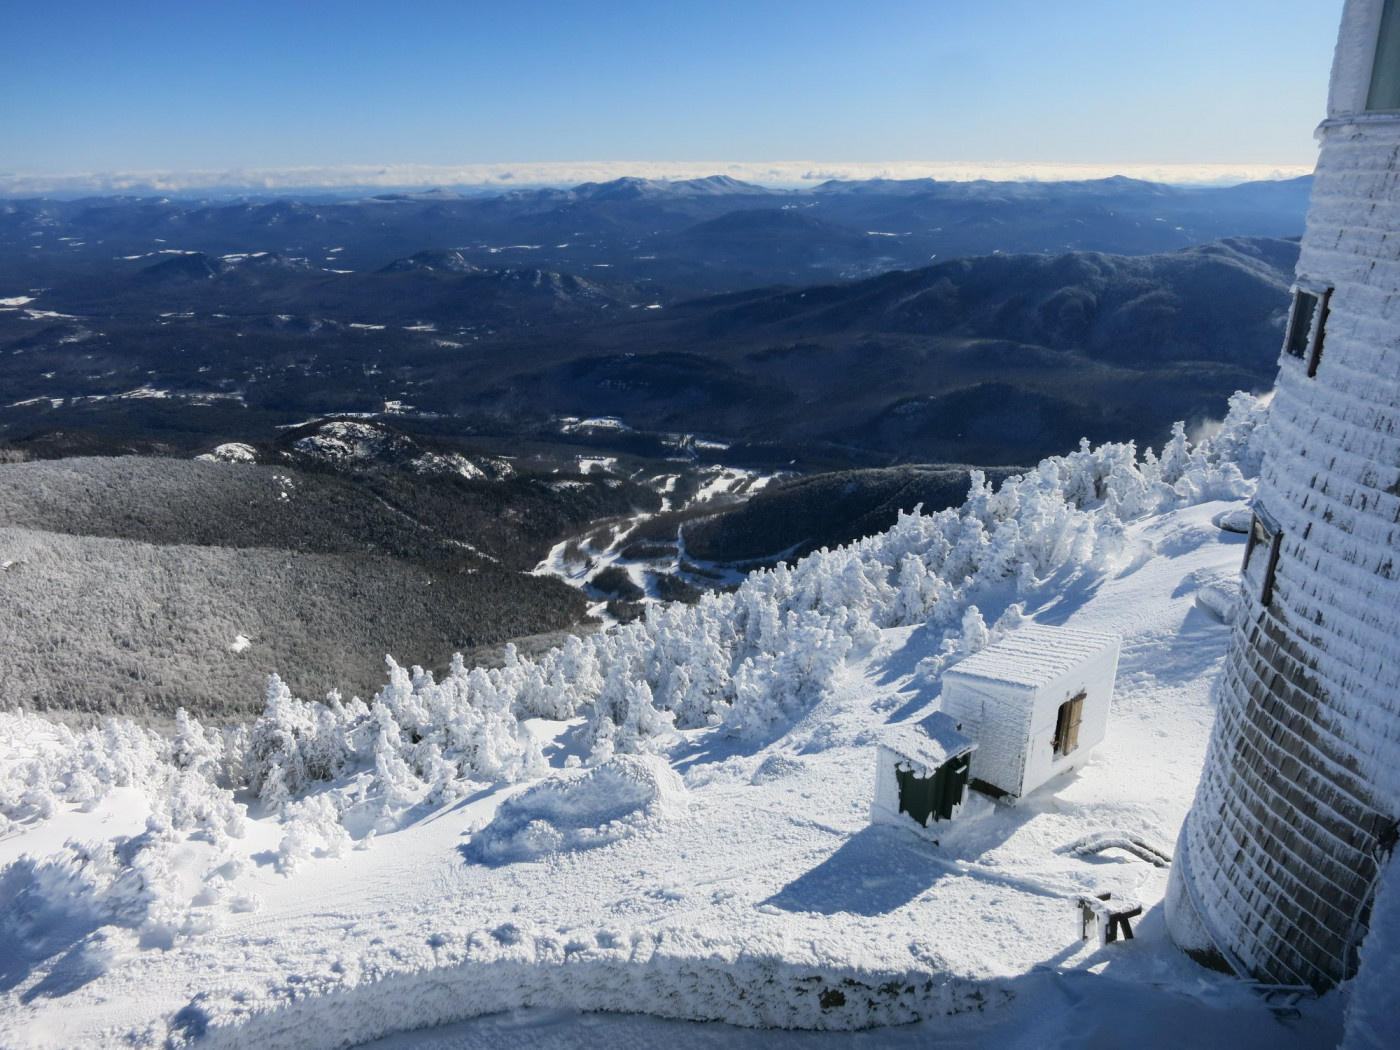 A wintery summit view, courtesy Atmospheric Sciences Research Station.